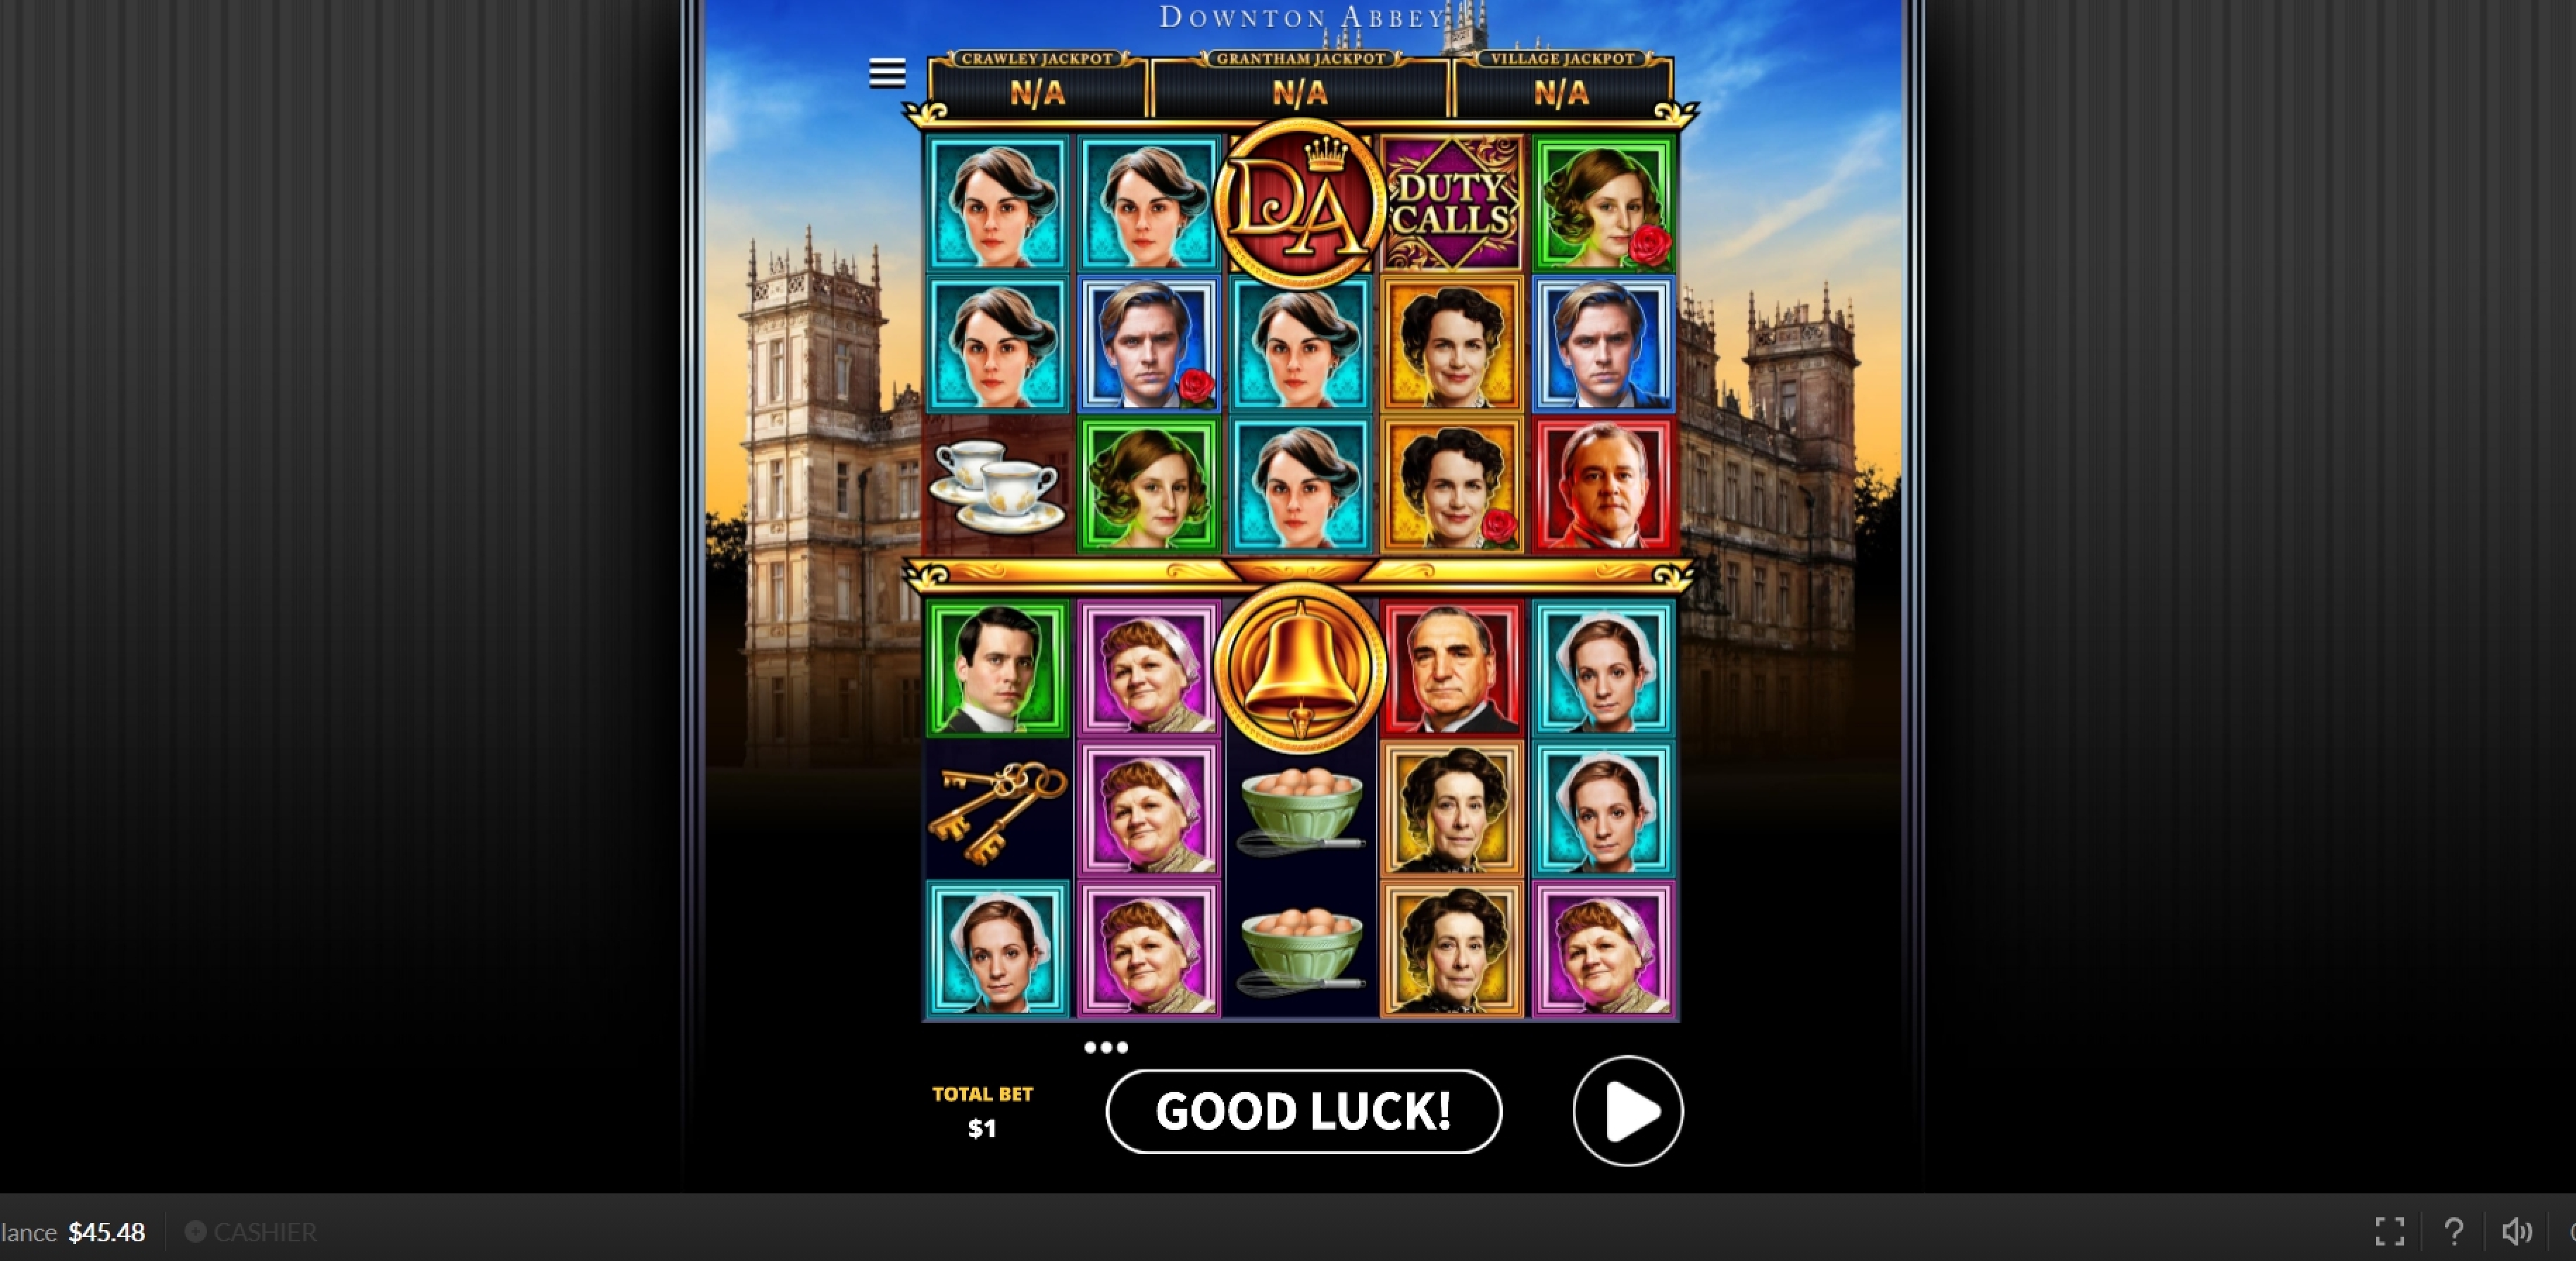 Win Money in Downton Abbey Free Slot Game by Skywind